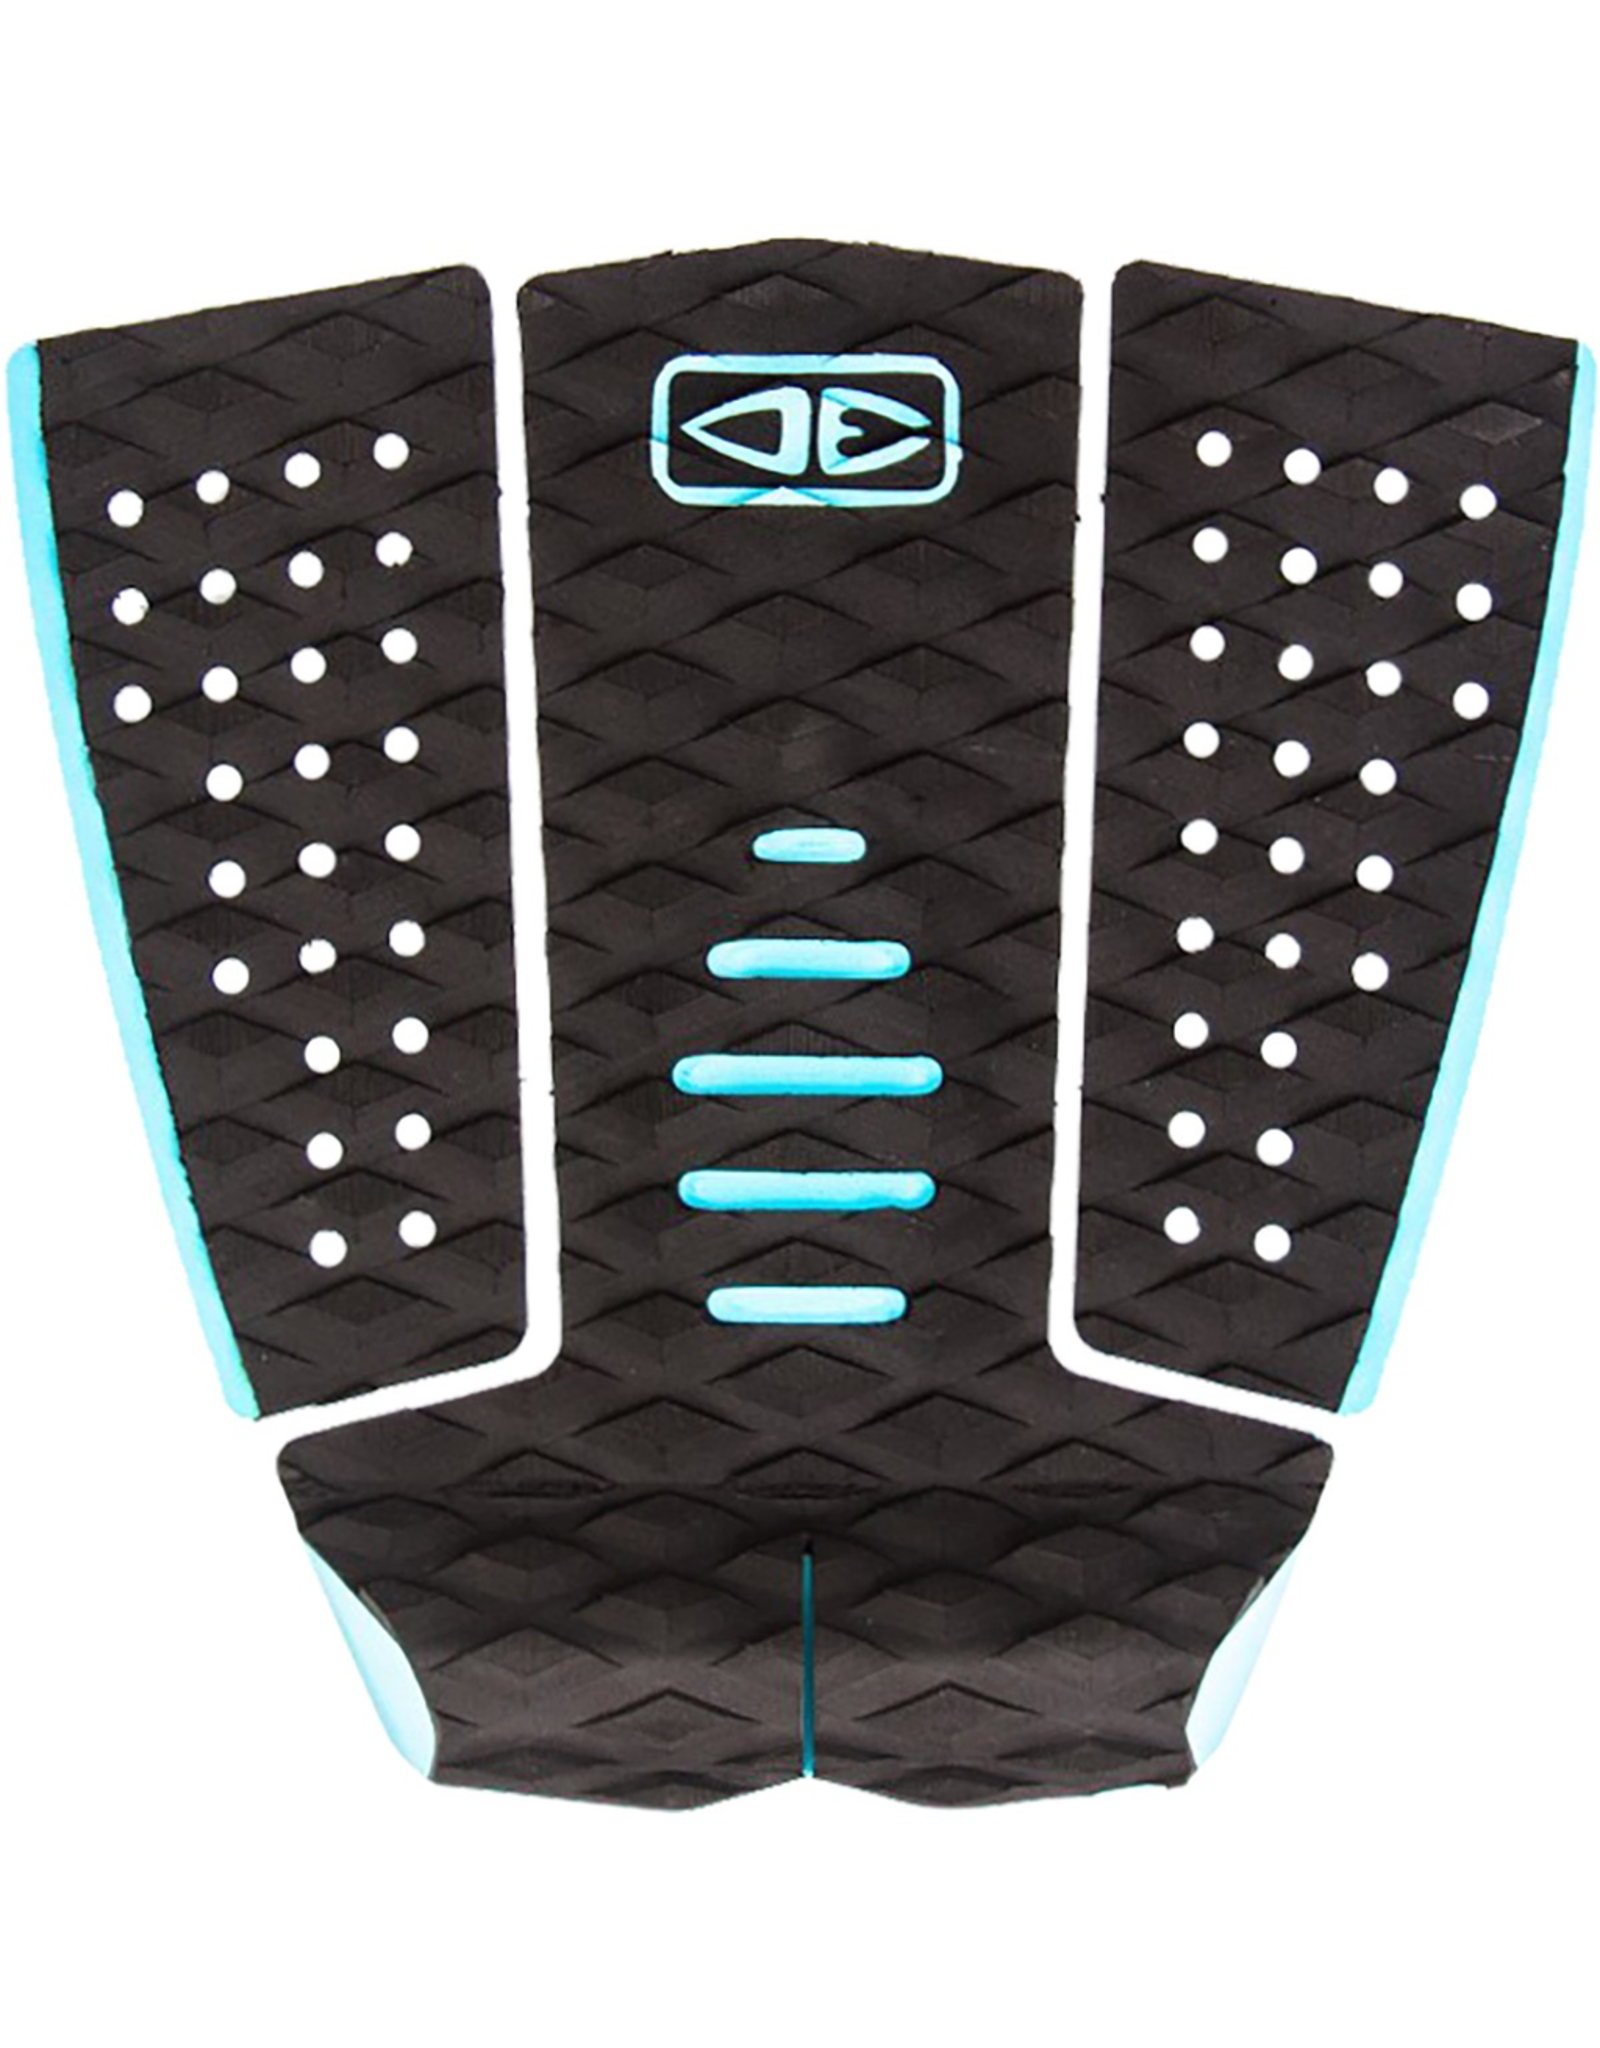 OCEAN & EARTH Ocean & Earth Tyler Wright Signature Black / Aqua Surfboard Traction Pad - 3 Piece Features:<br />
<br />
One (1) Ocean & Earth Tyler Wright Signature Black / Aqua Surfboard Traction Pad - 3 Piece from Ocean & Earth<br />
Super grippy to help keep your back foot planted<br />
Ma